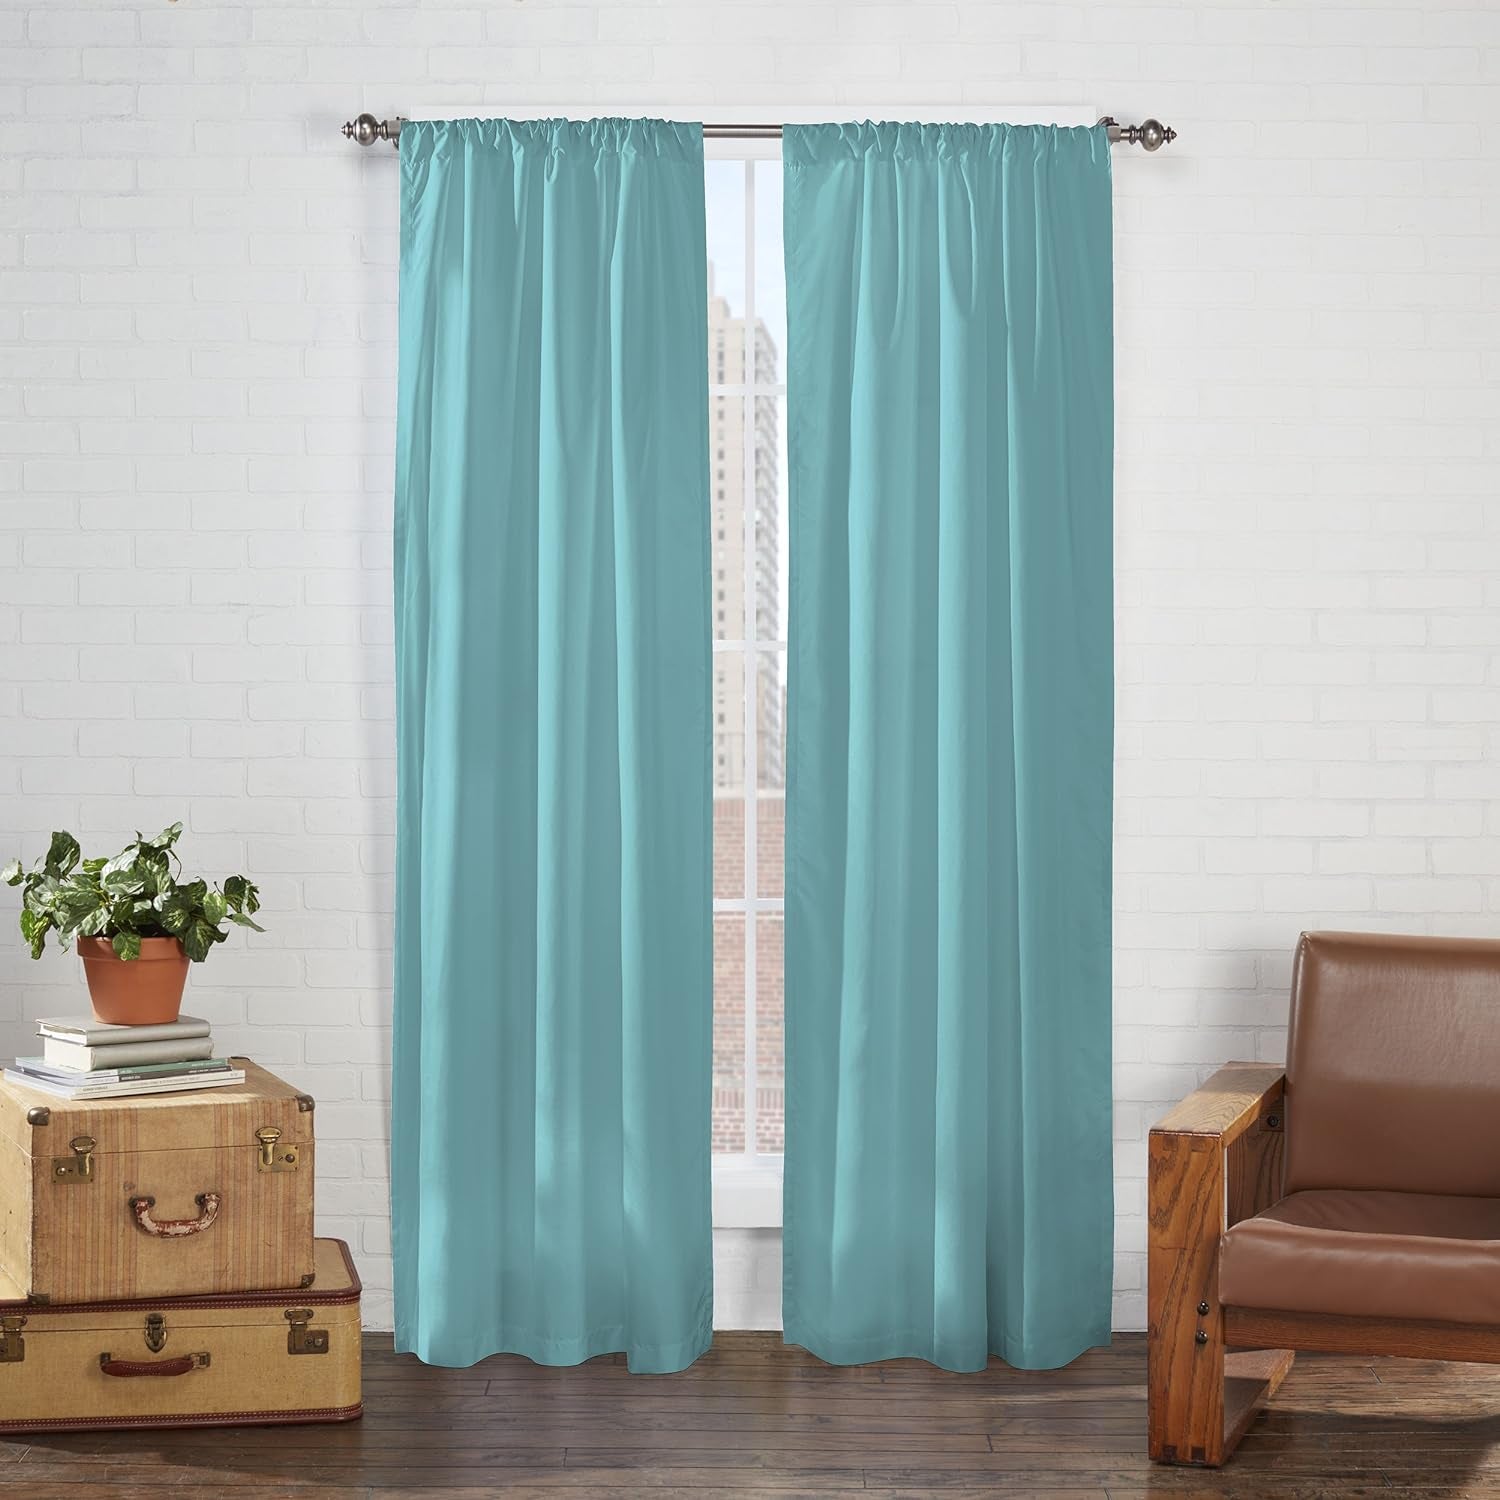 Pairs to Go Cadenza Modern Decorative Rod Pocket Window Curtains for Living Room (2 Panels), 40 in X 84 In, Teal  Keeco LLC Aegean 40 In X 54 In 